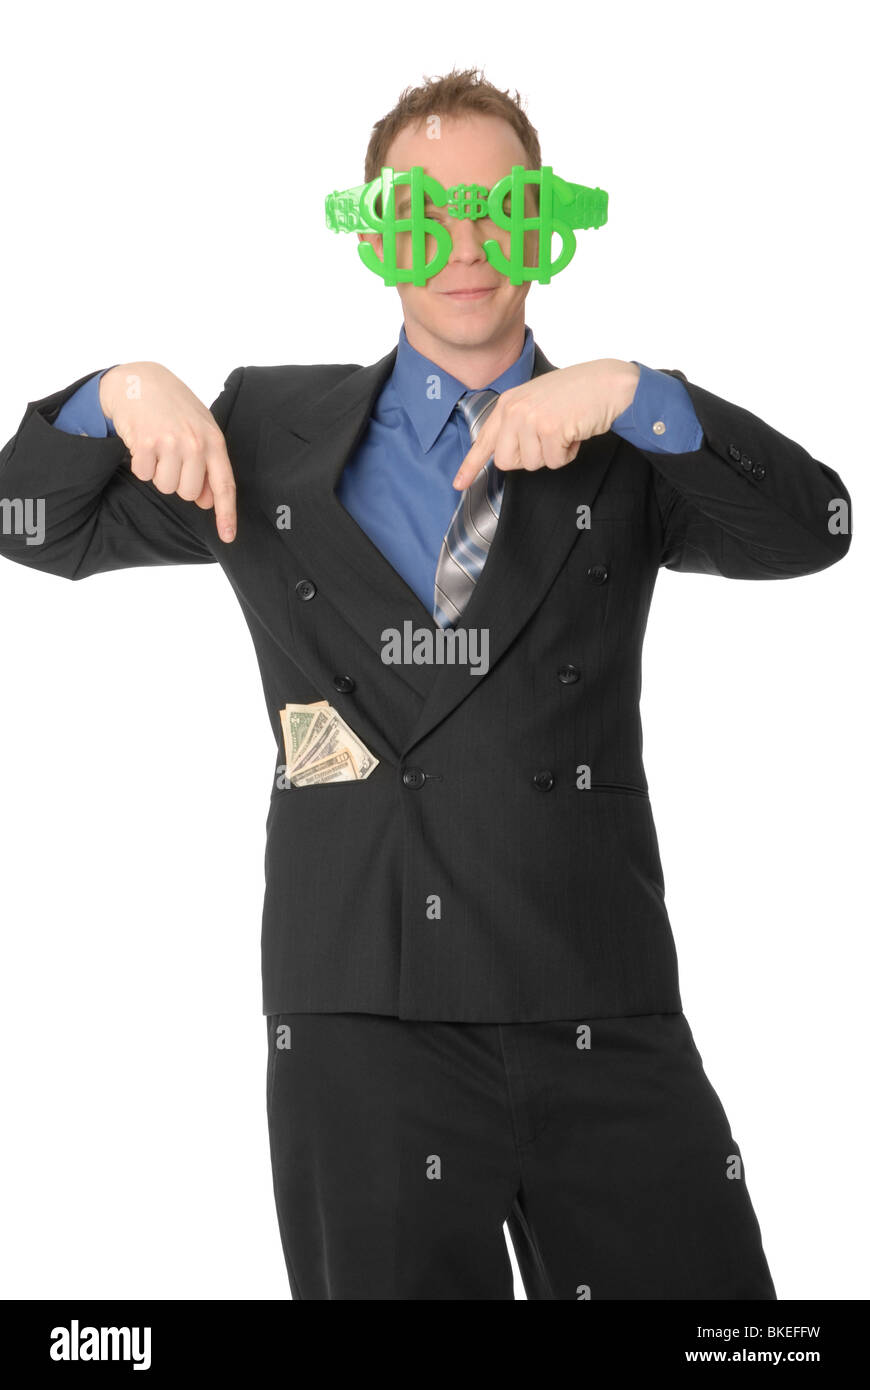 Man with dollar sign glasses and money in his pocket. Stock Photo